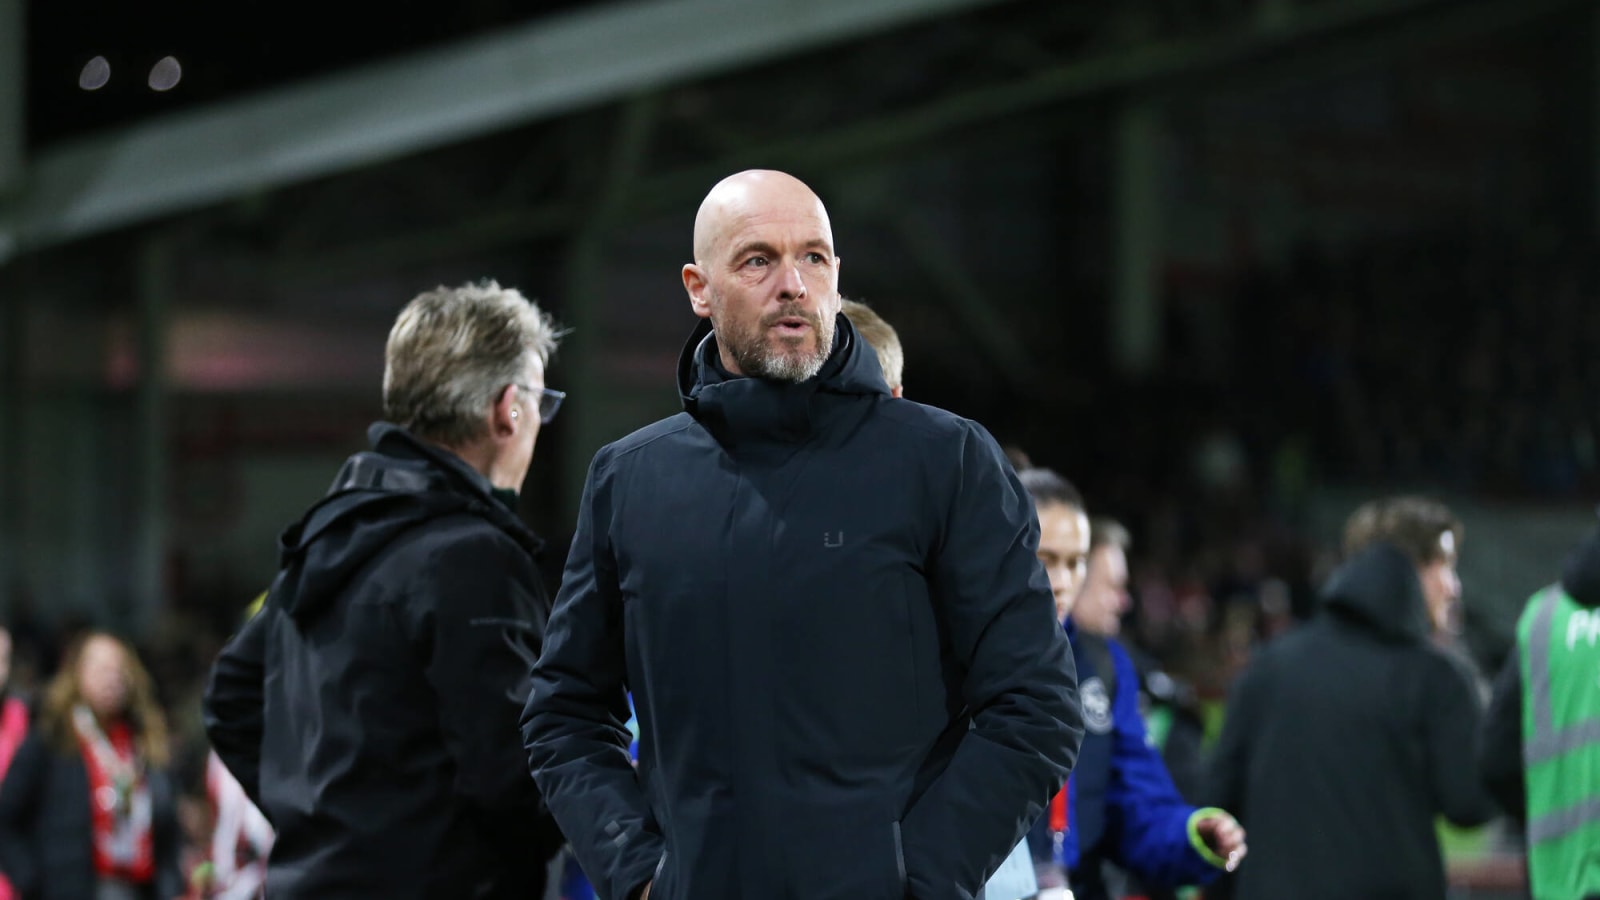 Erik ten Hag trying to build siege mentality ahead of Liverpool clash